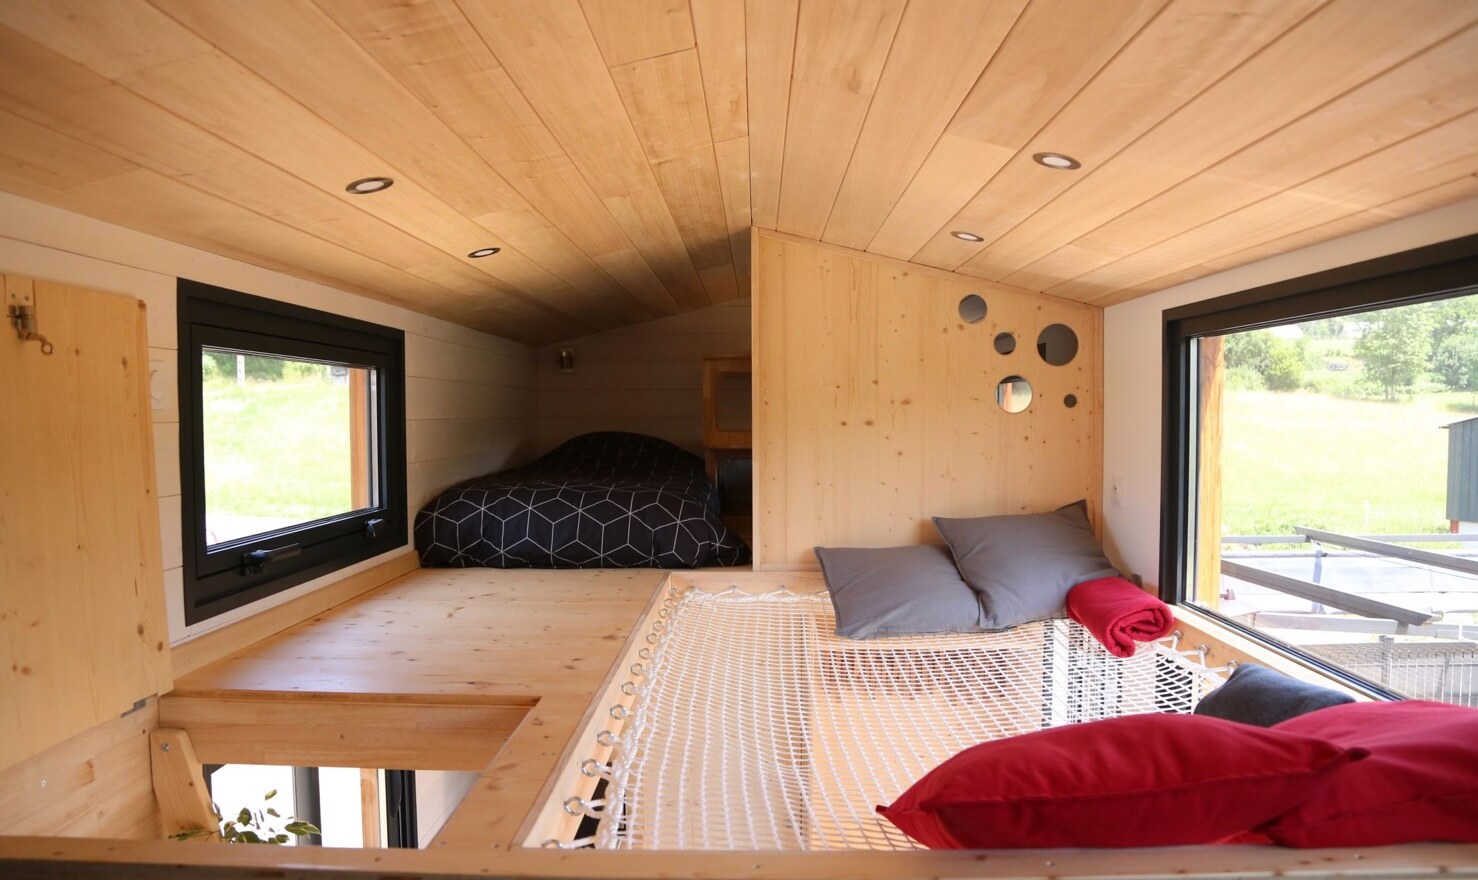 tinyhouse hebergement insolite nature bois chambres pyrenees france monplanvoyage